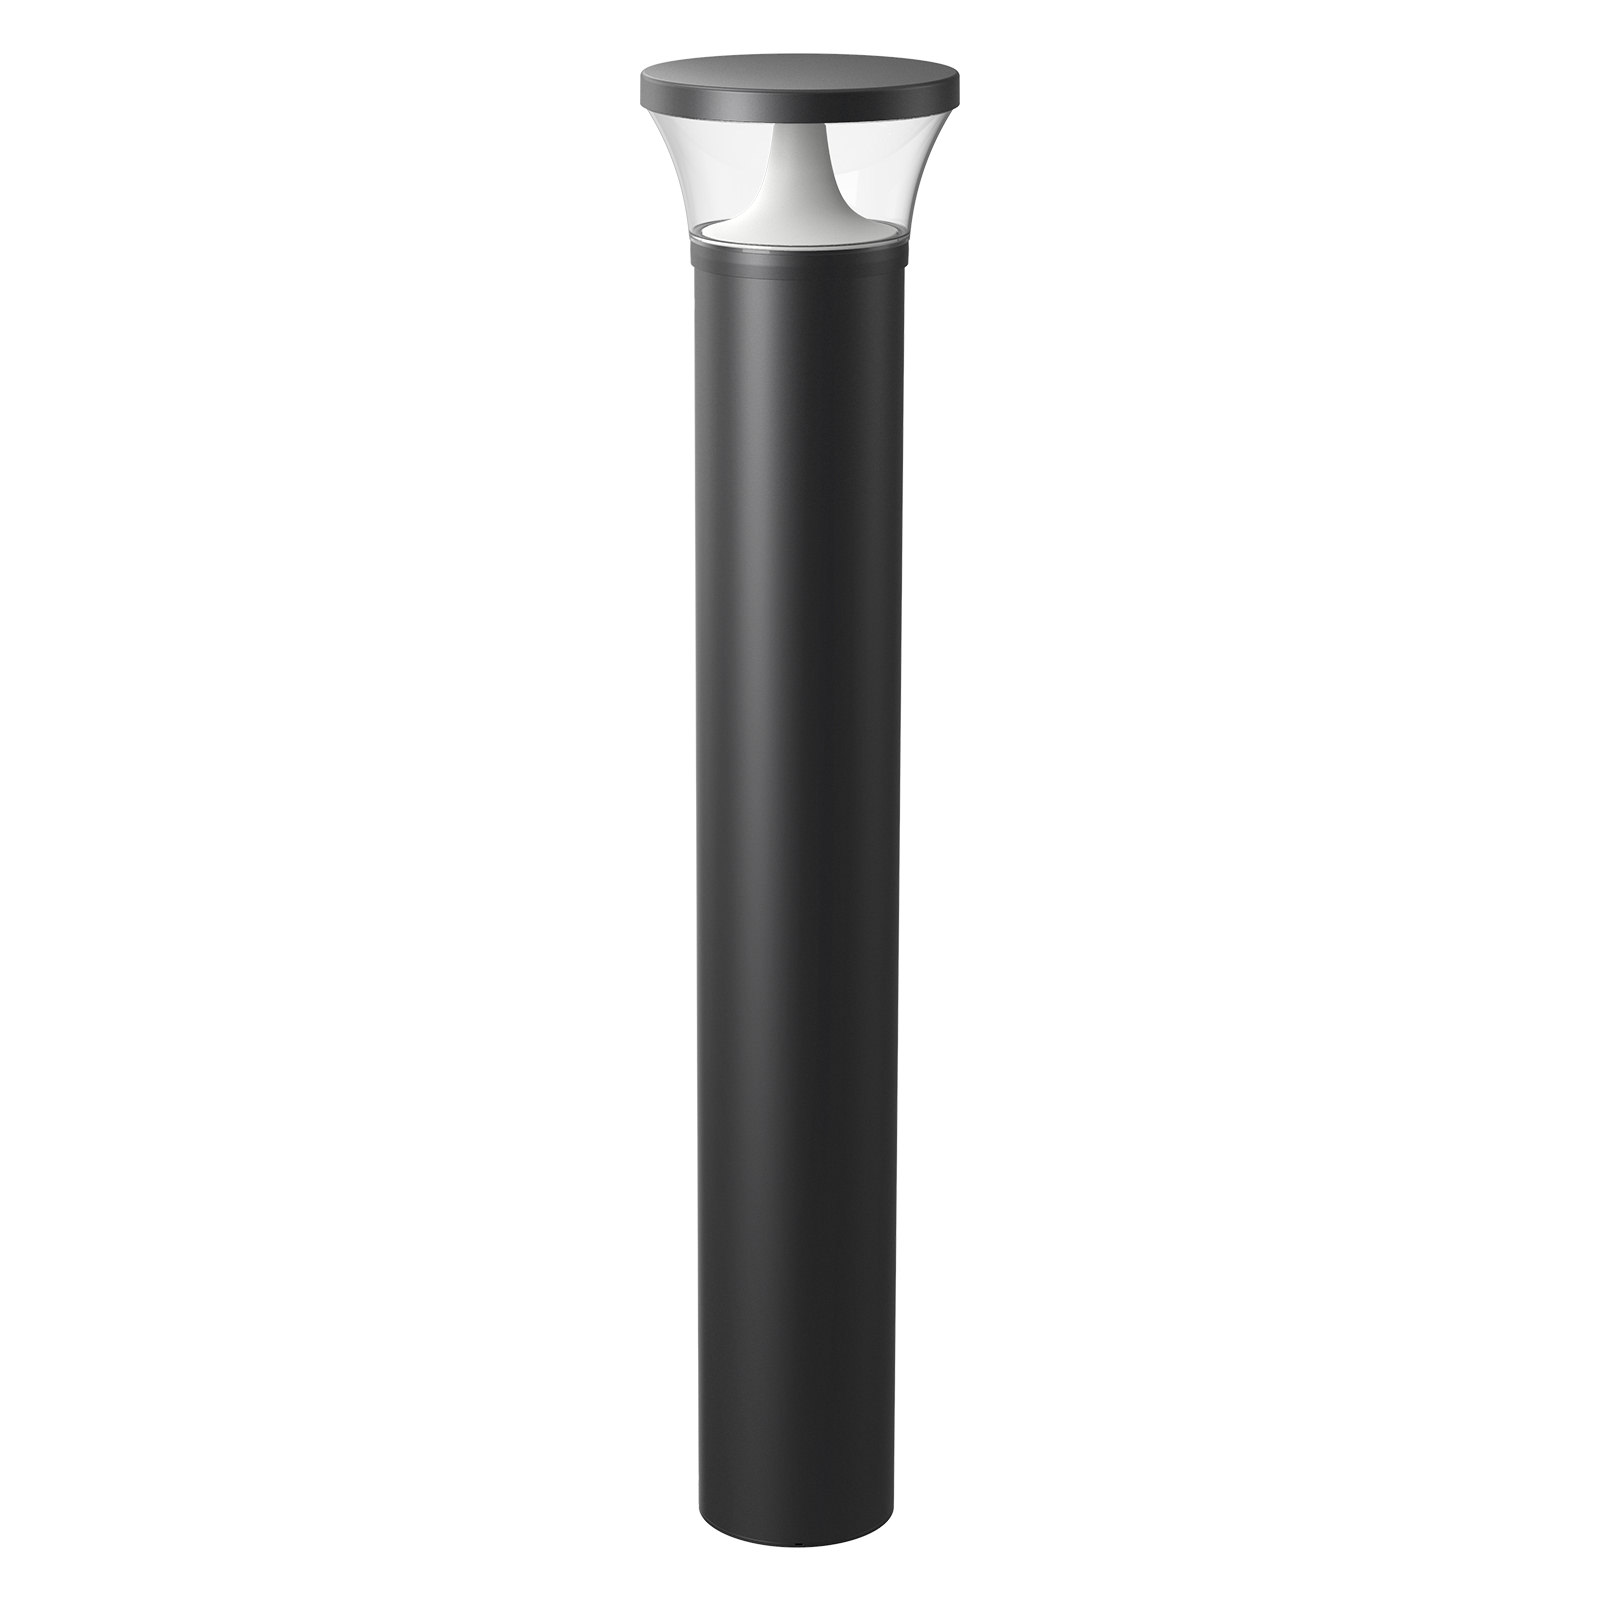 BL03 LED Bollard with 360° Coverage